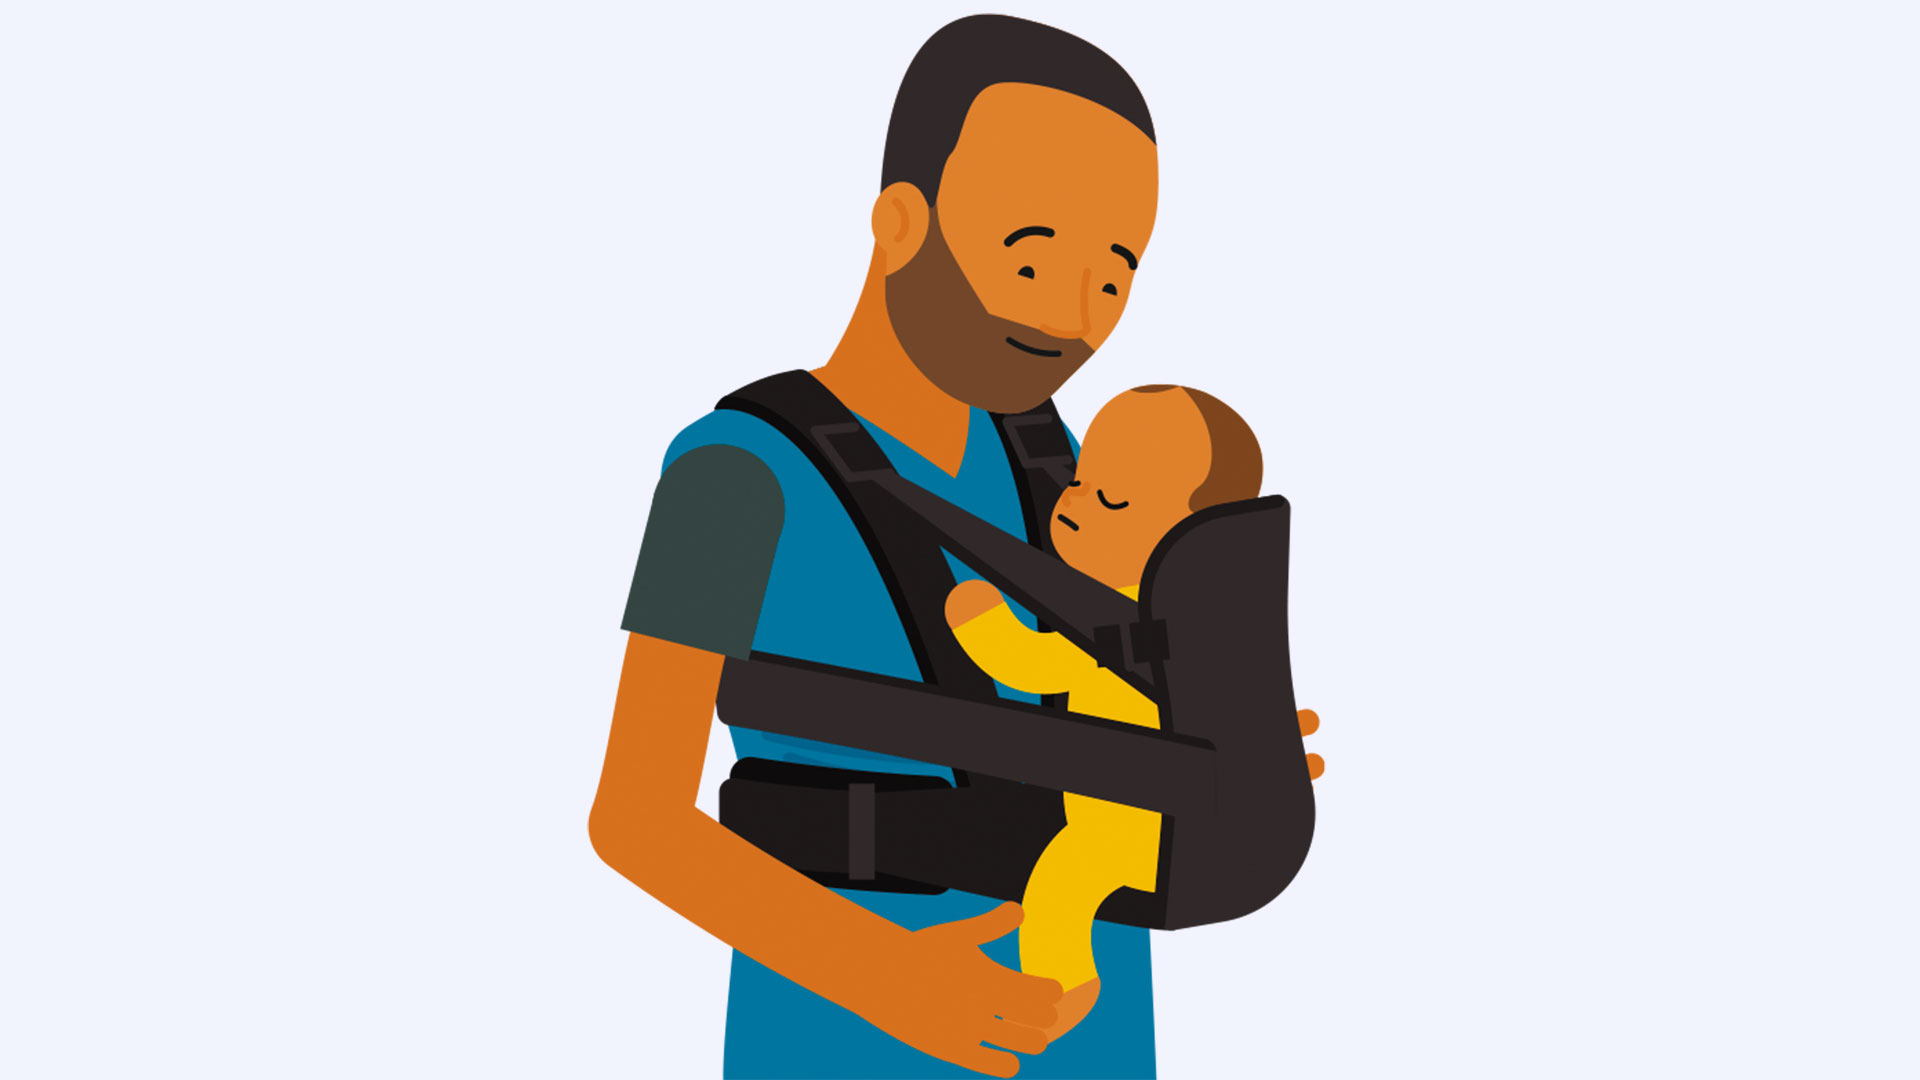 How to swaddle a baby or use a sling - image of a man using carrying a baby in a baby carrier